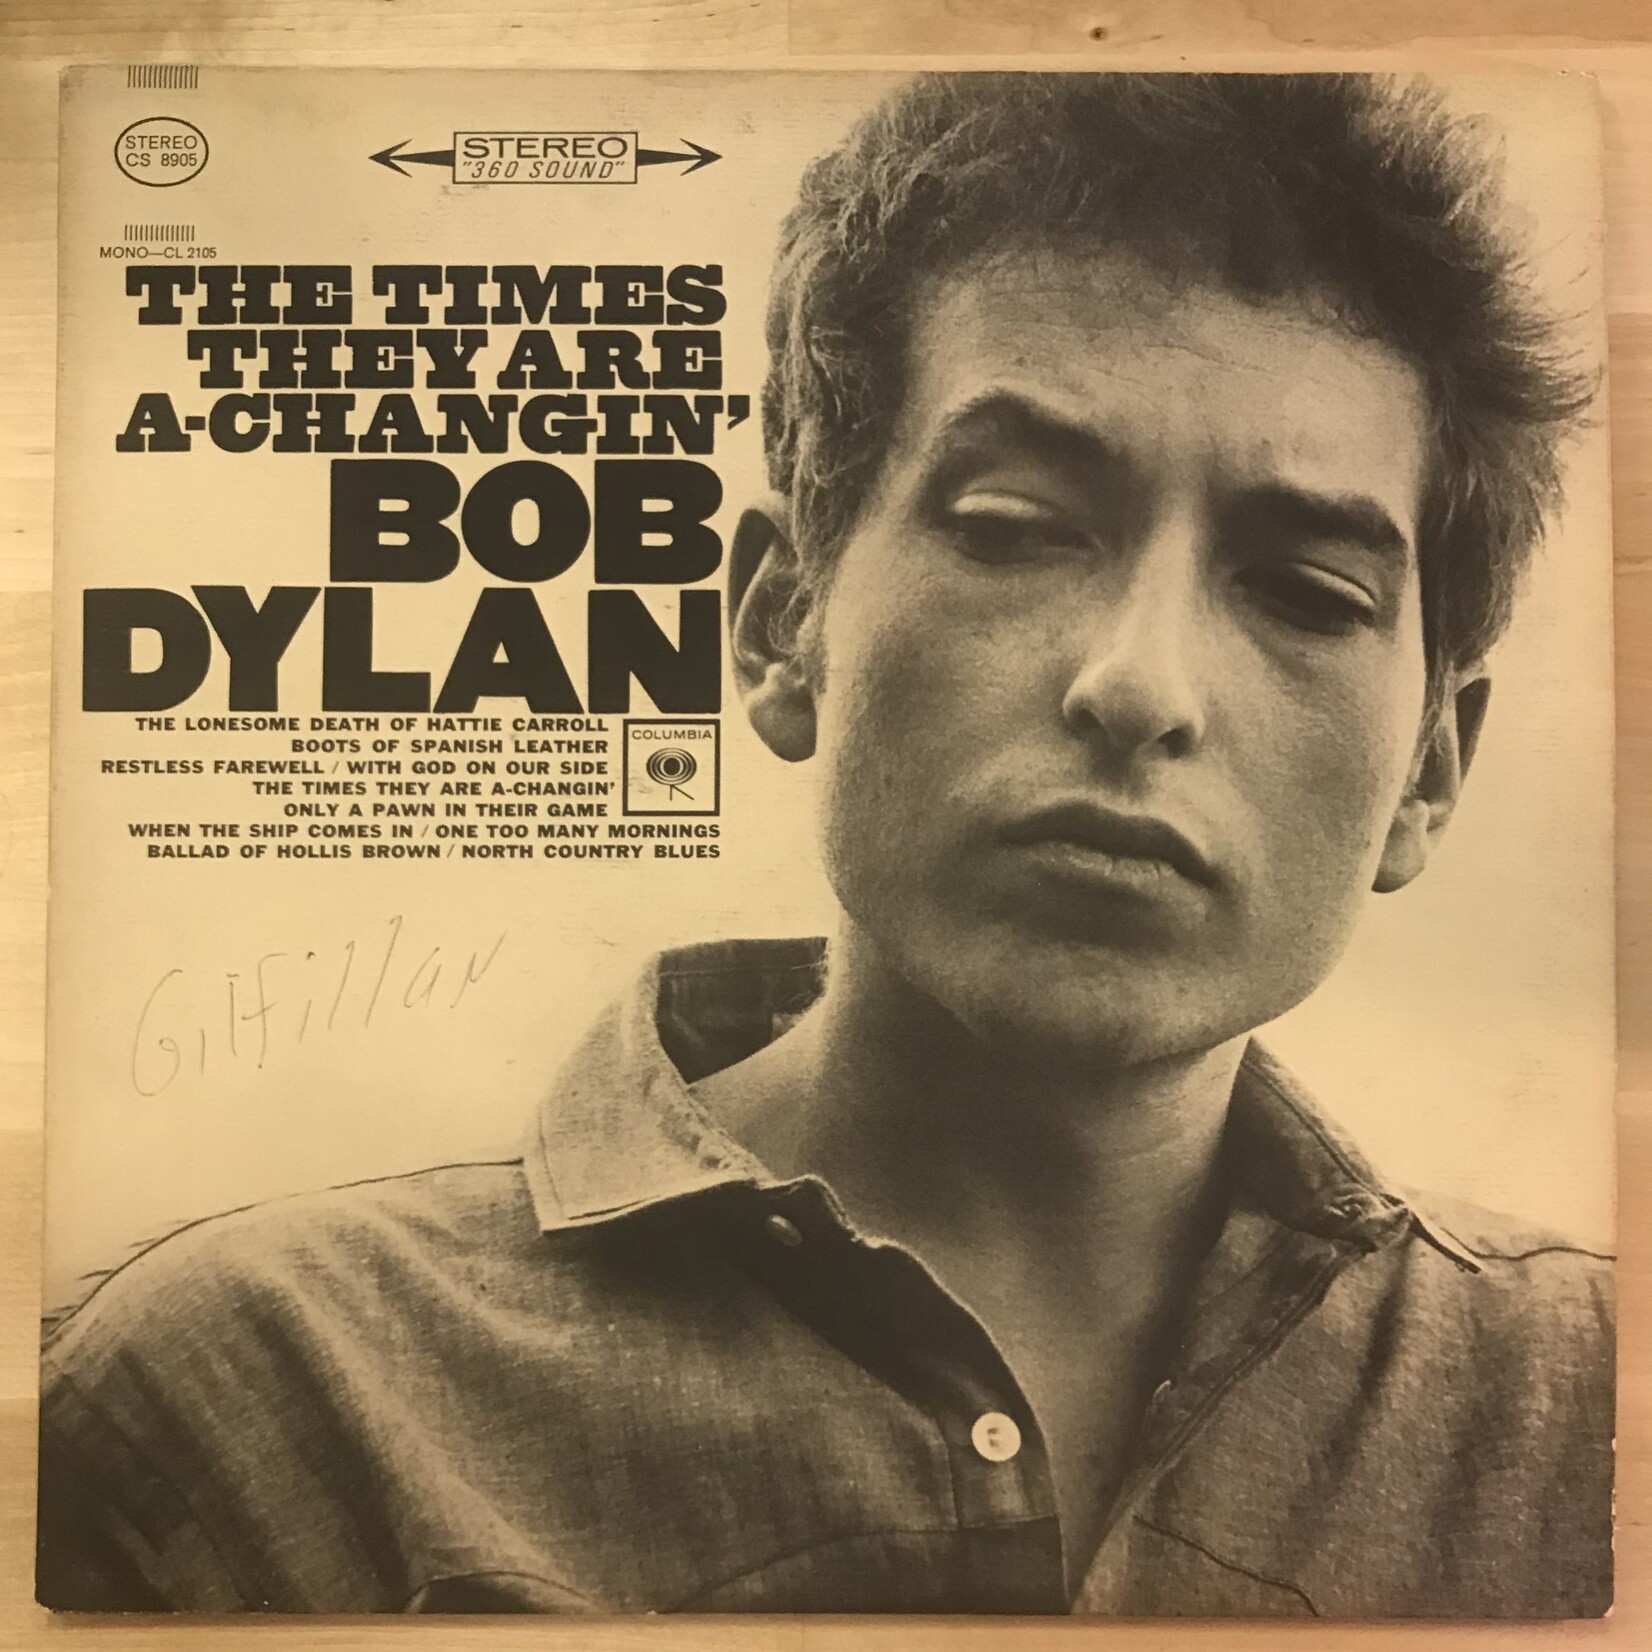 Bob Dylan - The Times They Are A-Changin’ - CS8905 - Vinyl LP (USED)